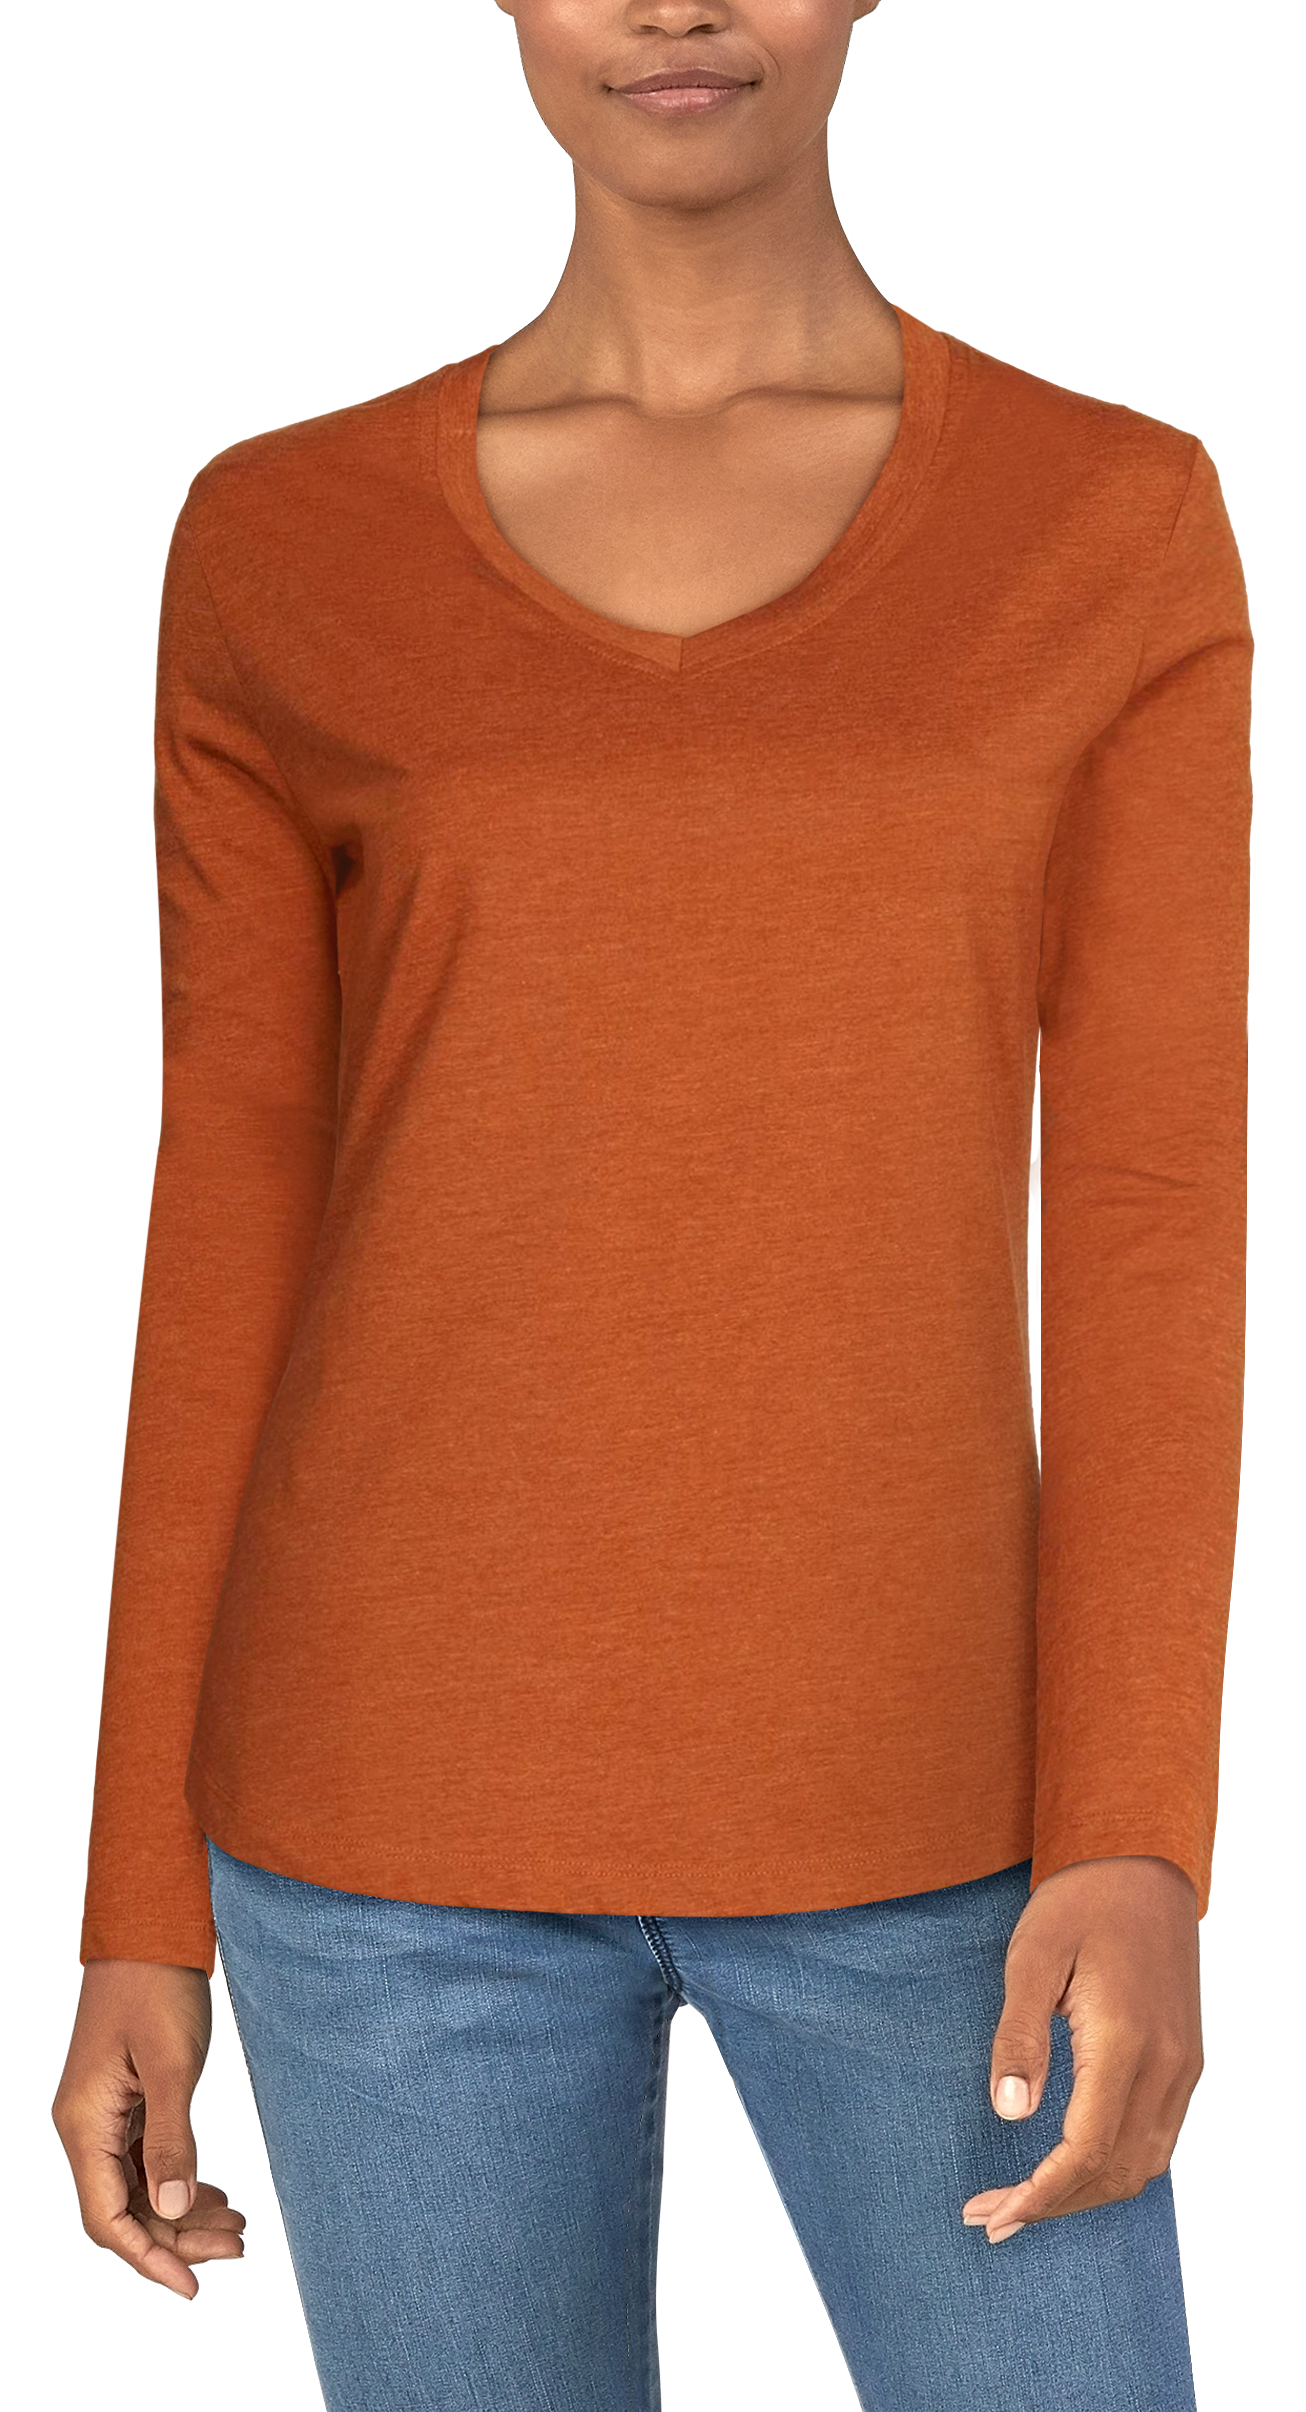 Natural Reflections Essential Long-Sleeve V-Neck T-Shirt for Ladies - Caramel Cafe - L